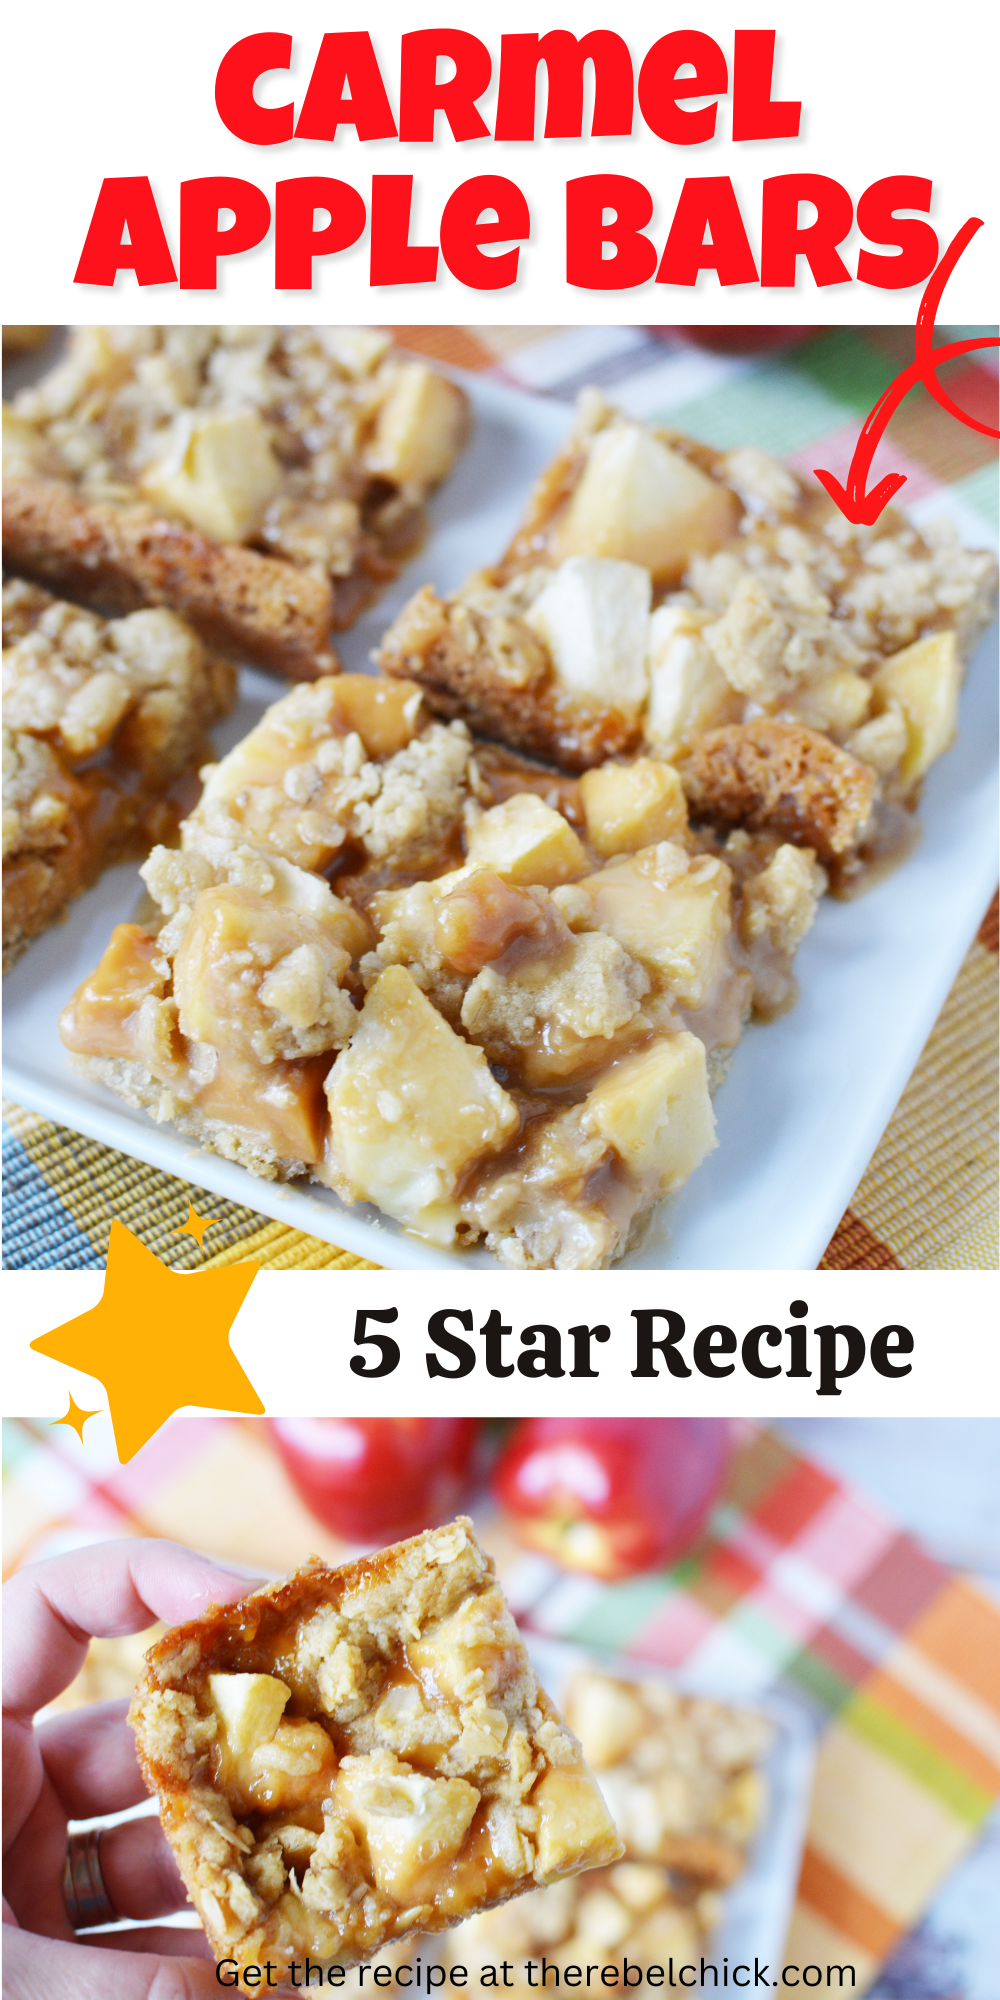 oatmeal bars covered in chunks of apples and drizzled with caramel